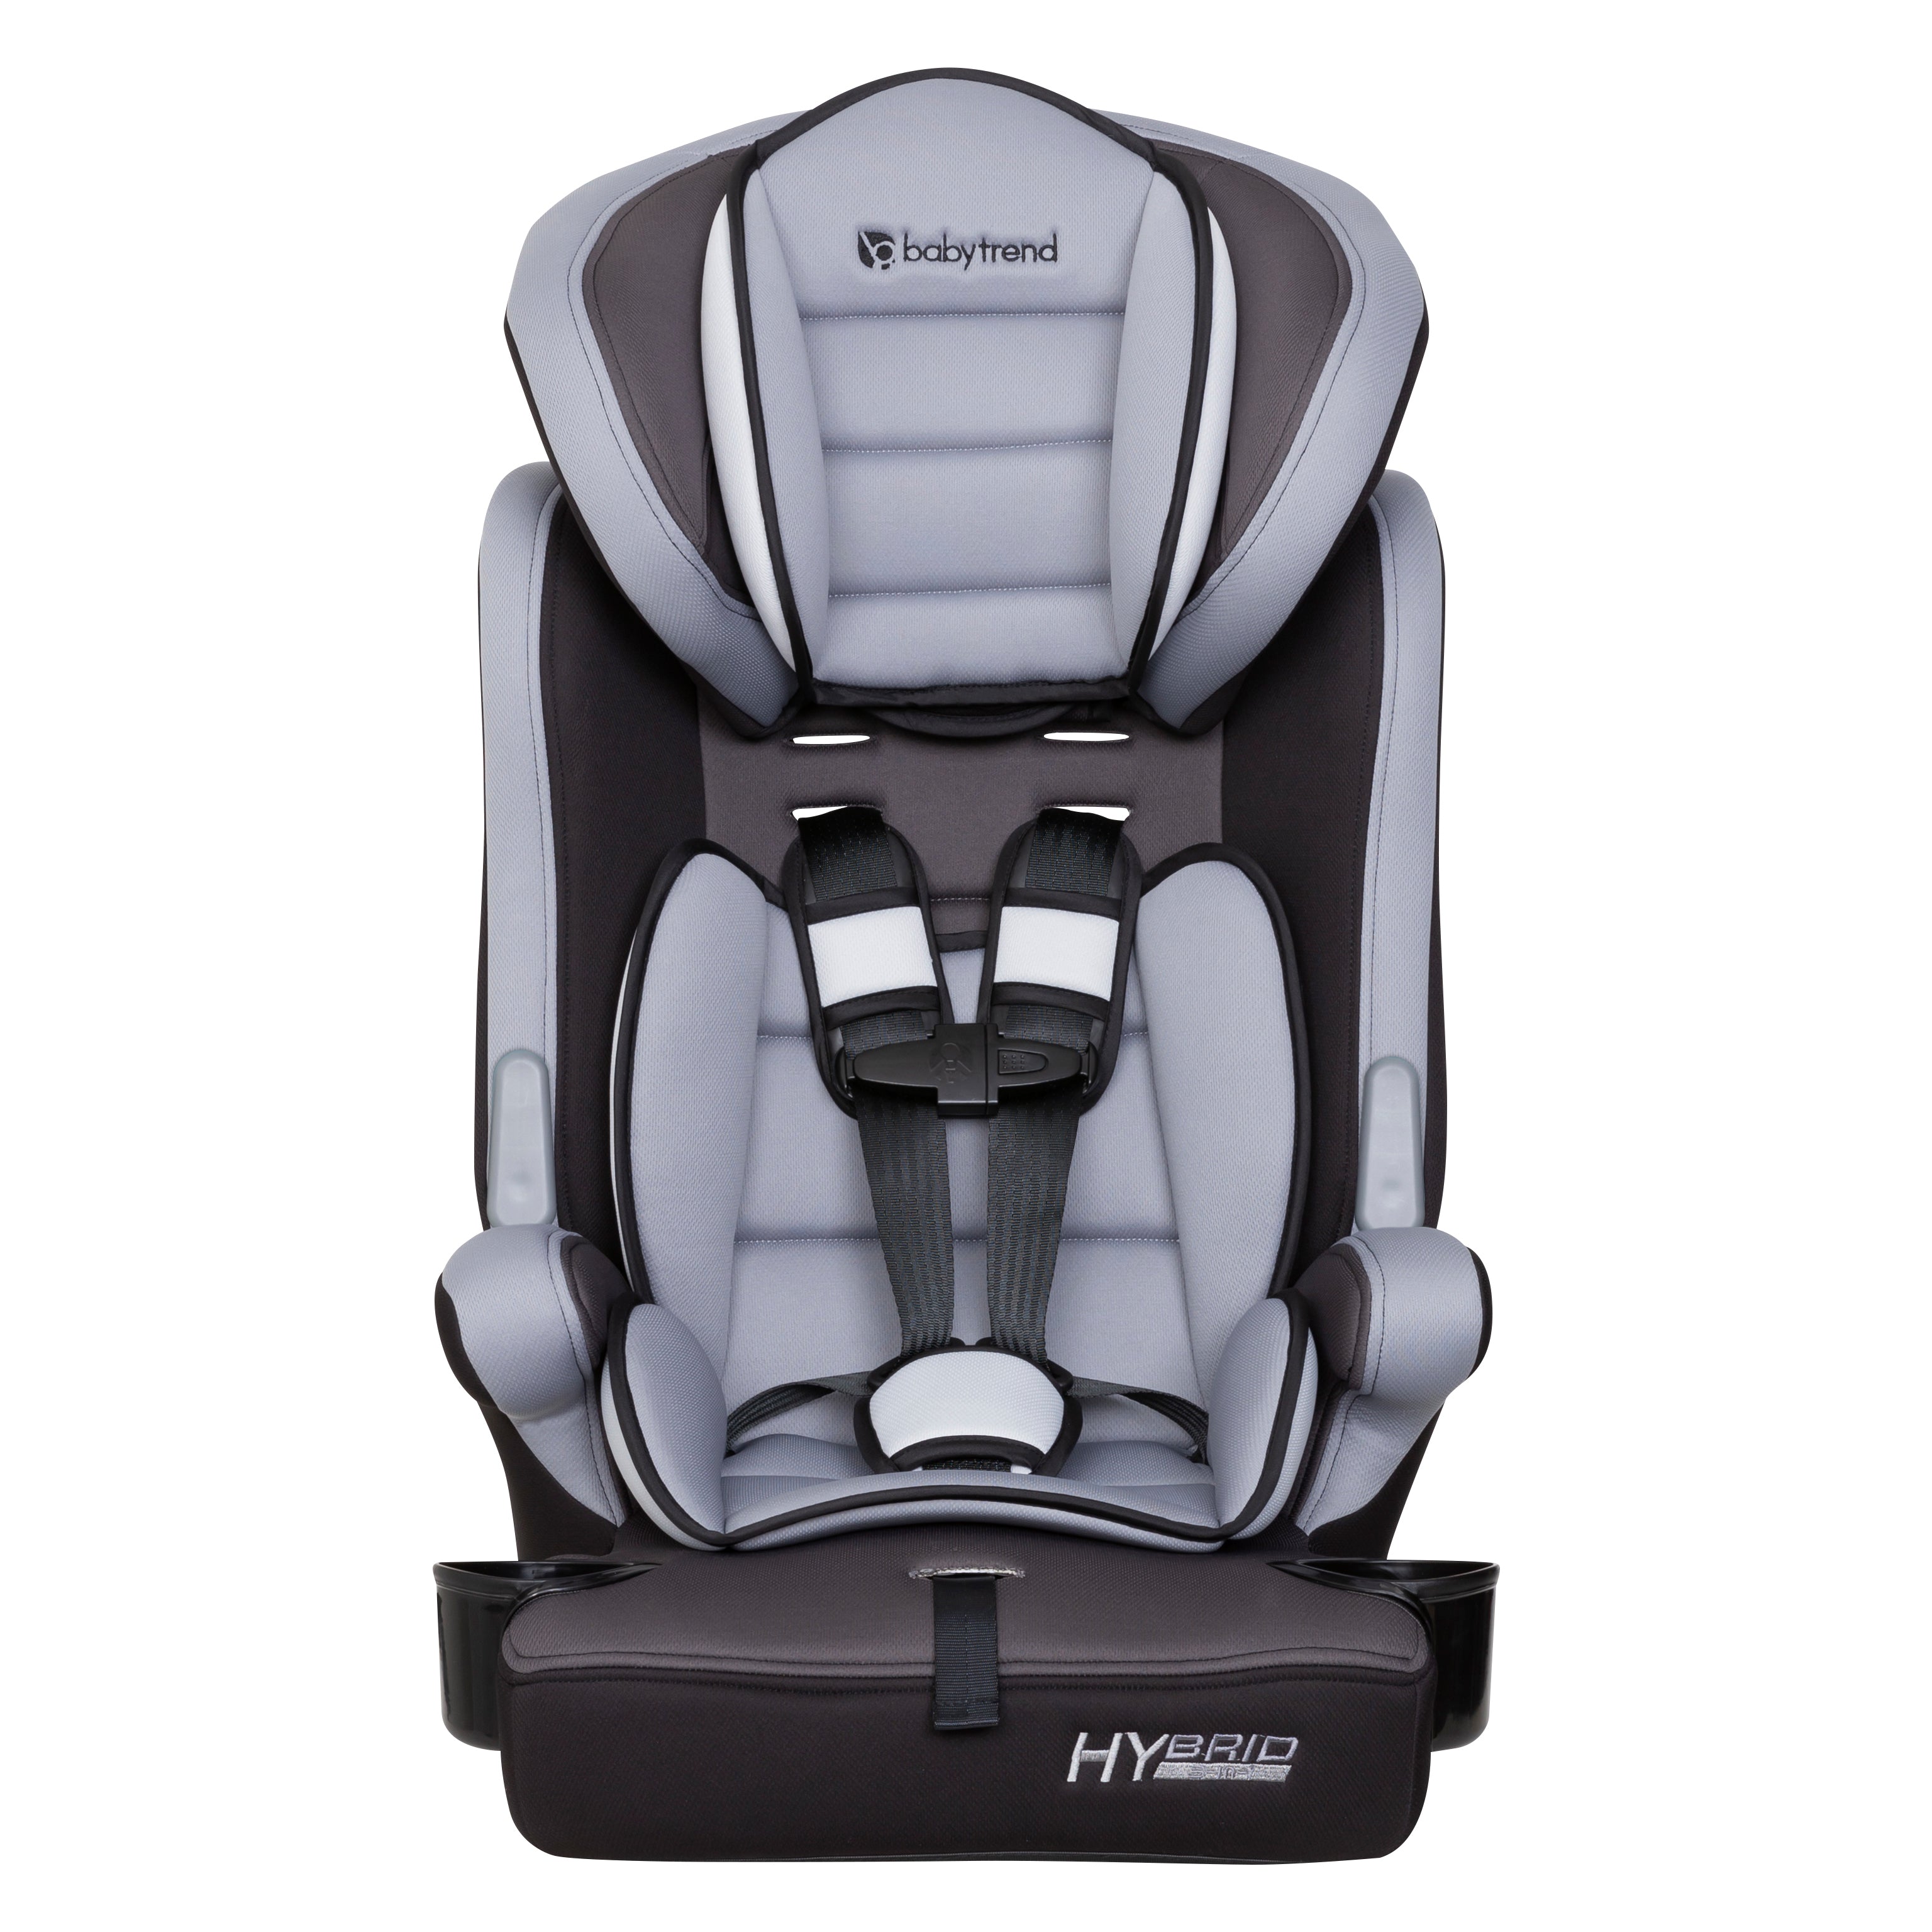 Baby Trend Hybrid™ 3-in-1 Combination Booster Car Seat - Diesel Grey -  Target Exclusive - FB49E43A